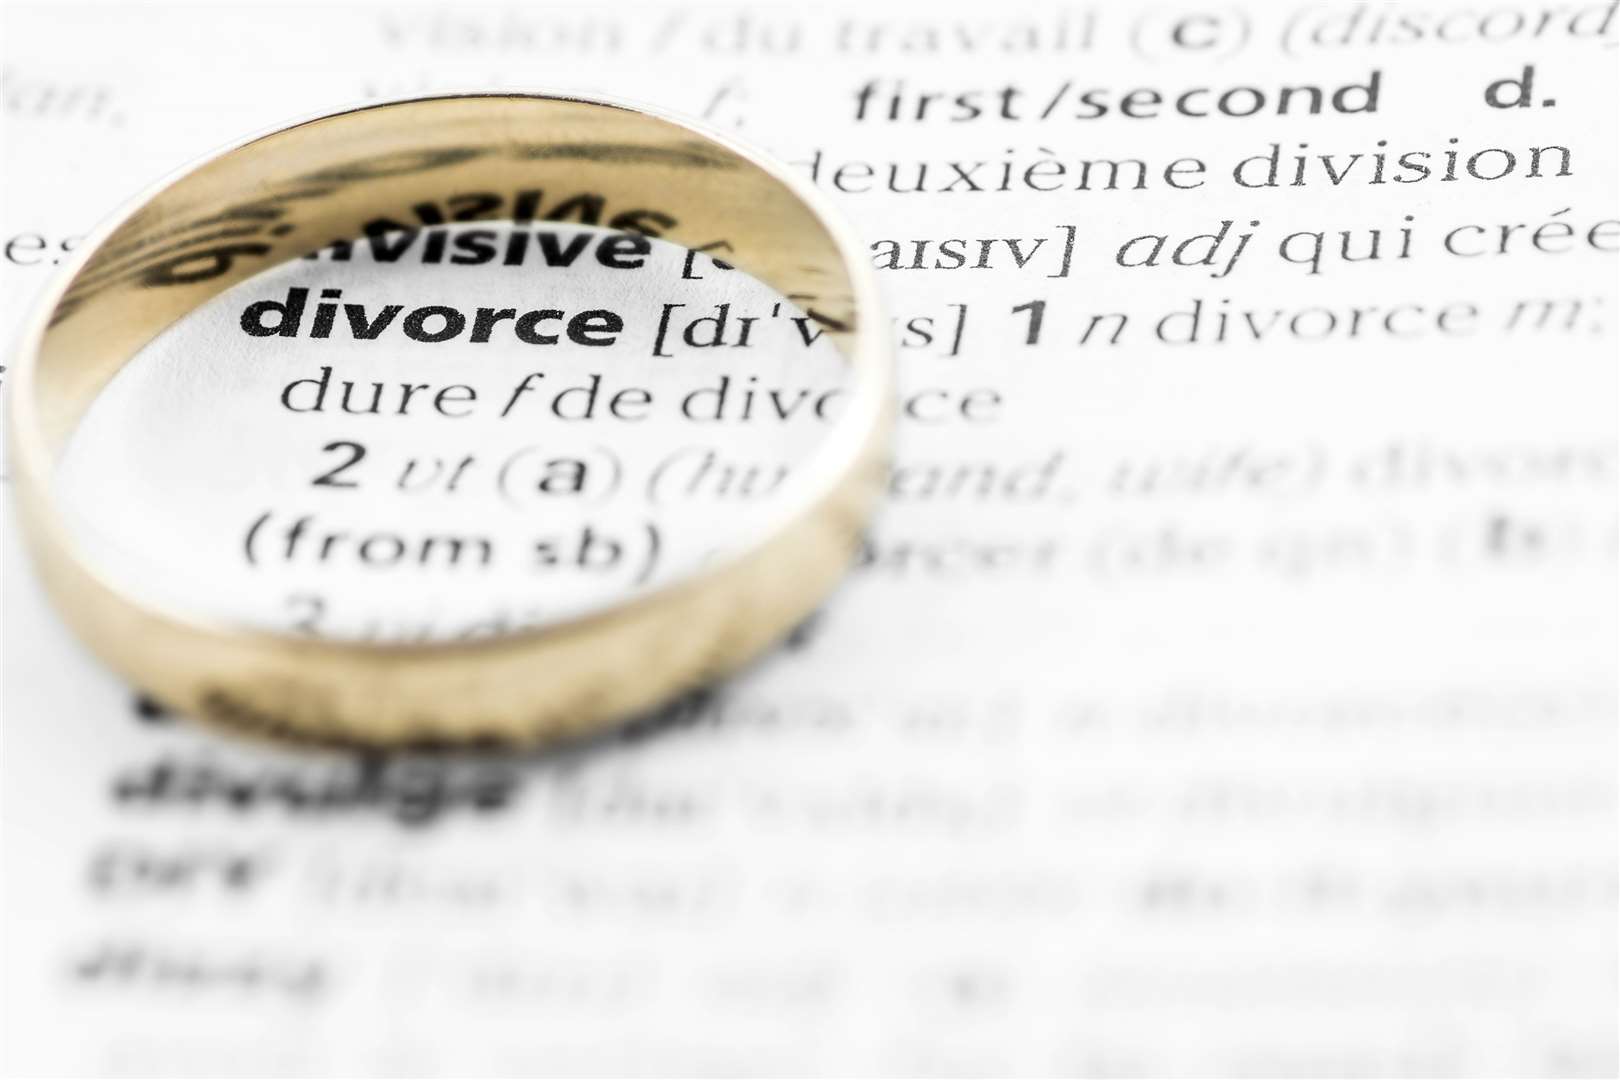 No fault divorce will be implemented from Wednesday, April 6